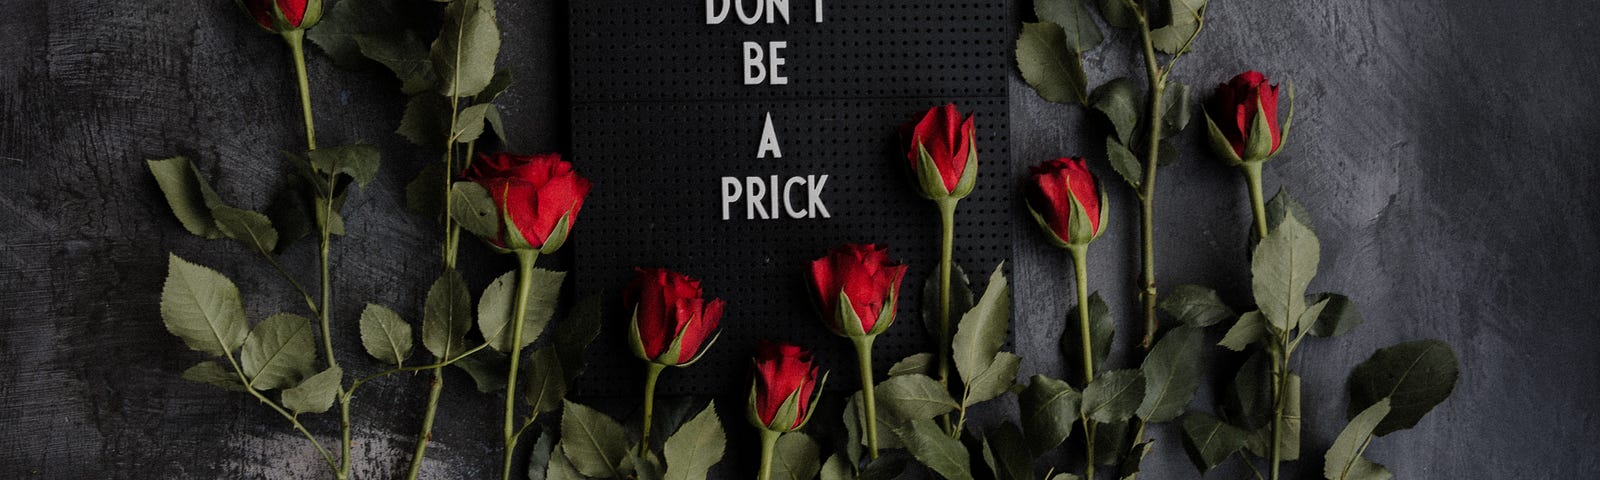 sign that says don’t be a prick surrounded by roses